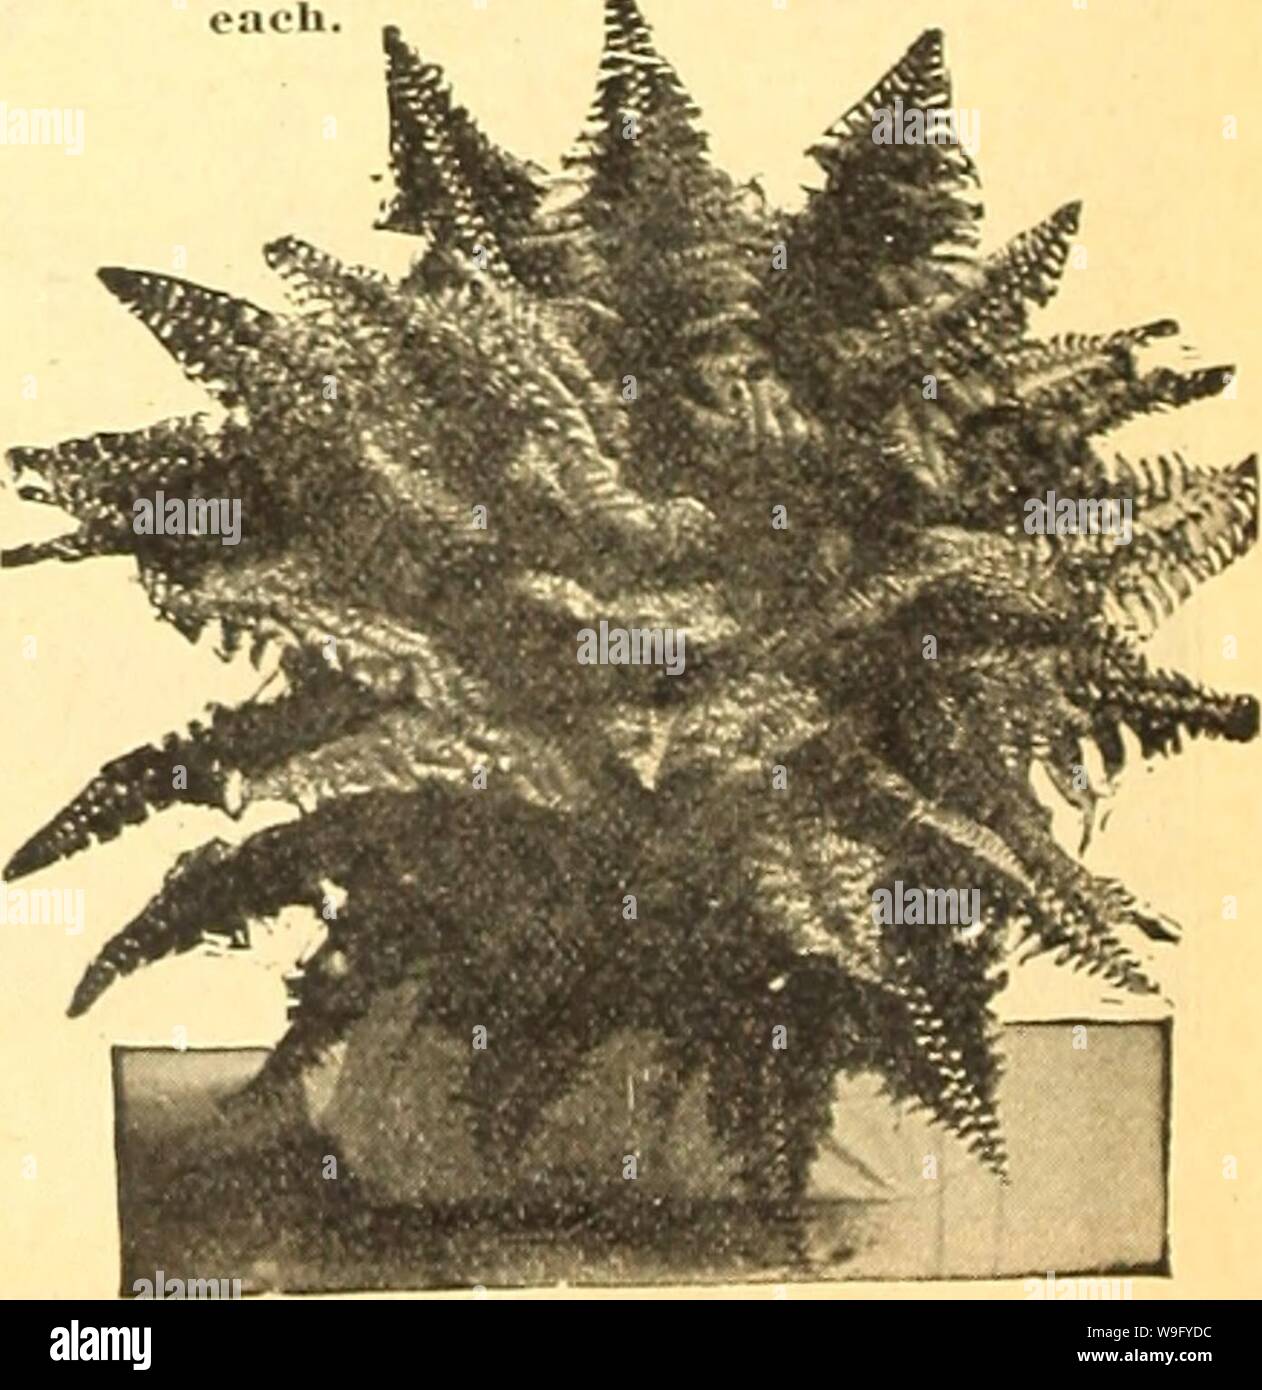 Archive image from page 83 of Currie's farm & garden annual. Currie's farm & garden annual : spring 1922 47th year  curriesfarmgarde19curr 5 Year: 1922 ( The Beautiful Feather Fern. FEATHER FERN. Unsurpassed for Window Boxes or Hanging Baskets. The foliage is composed of dense, glossy green, graceful drooping branches. It is a very valuable house plant, being of easy culture, the sprays growing four to five feet long. When cut, the sprays retain their freshness for an unusual length of time. 30c eacli: 3 for 75c; larger plants 50c and 75c each. FERNS. Ostrich Plume or AVhItmanll Fernâ 'Fronds Stock Photo